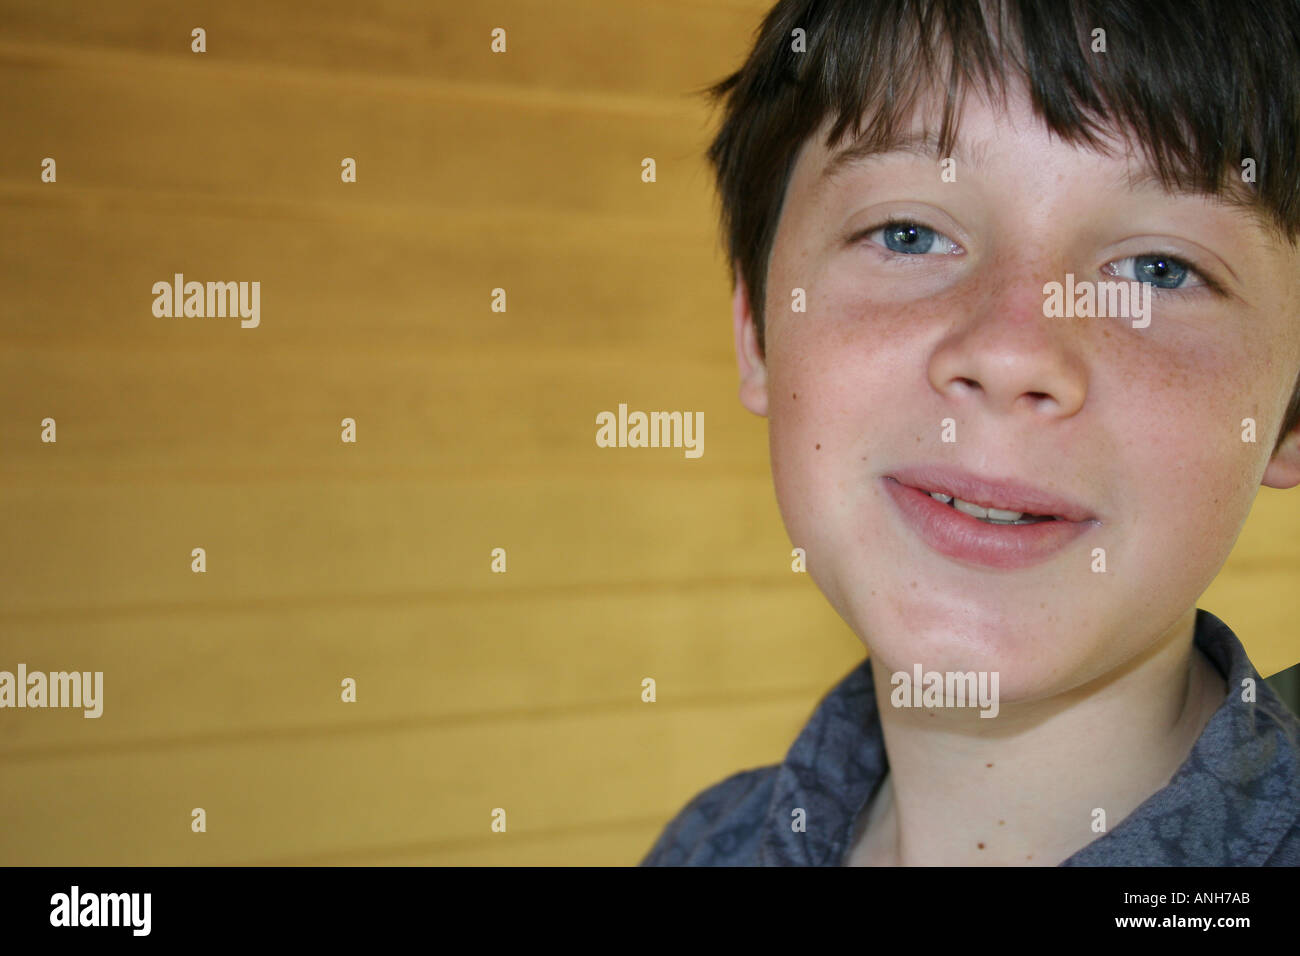 Expressive young boy shows a warm and wry smile Stock Photo